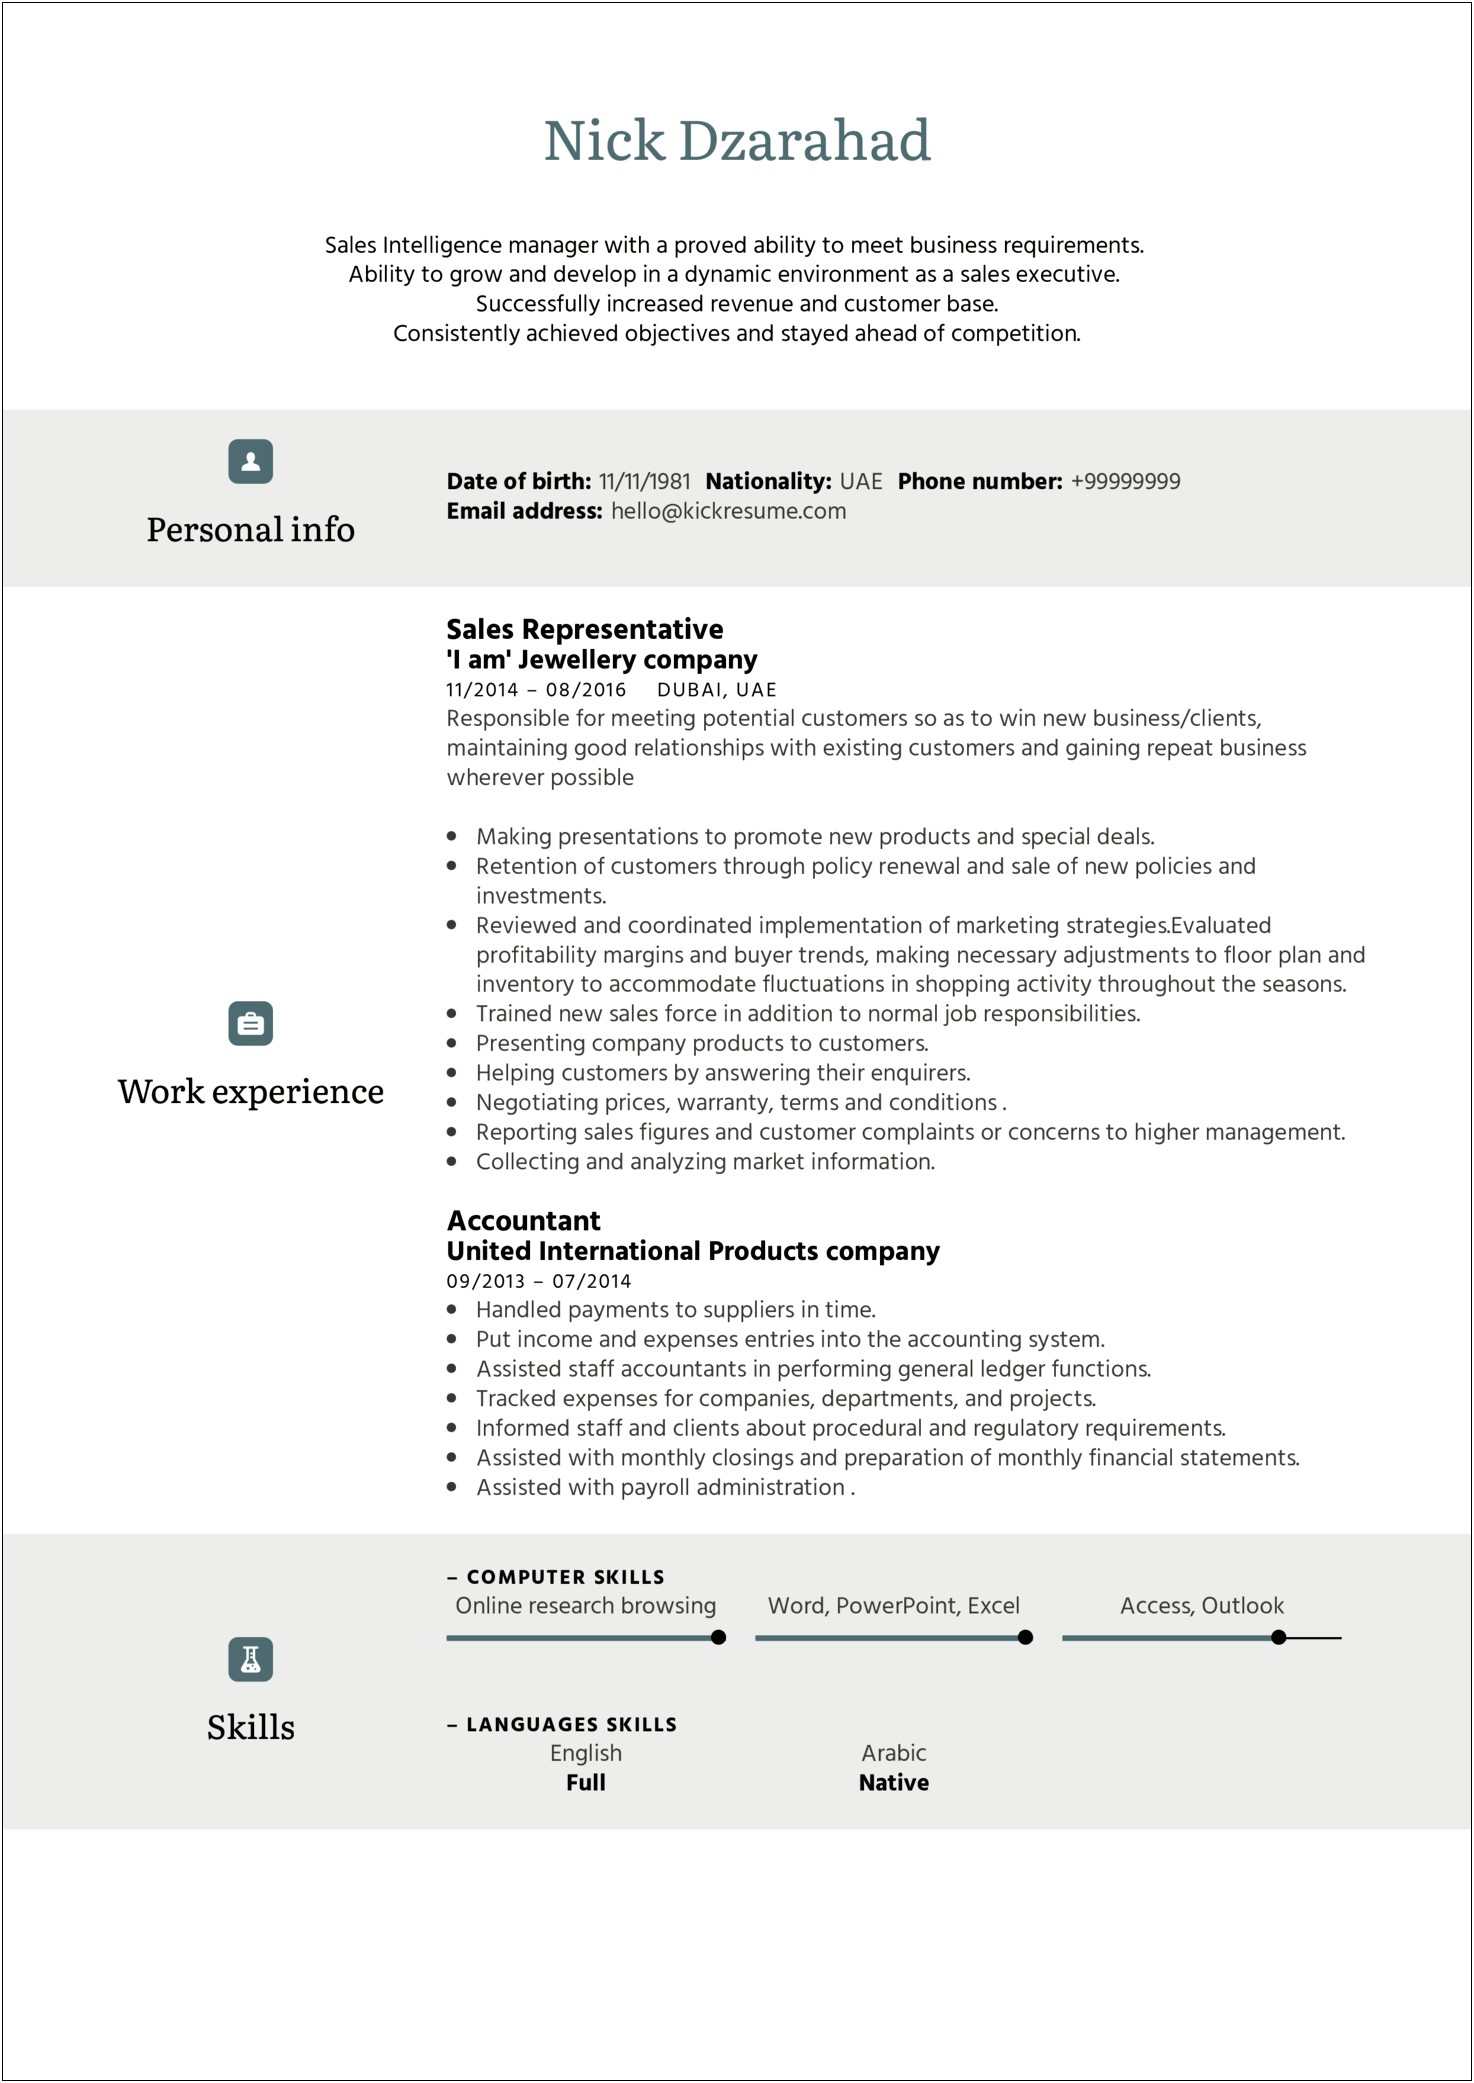 Best Resume Objective For Sales Position